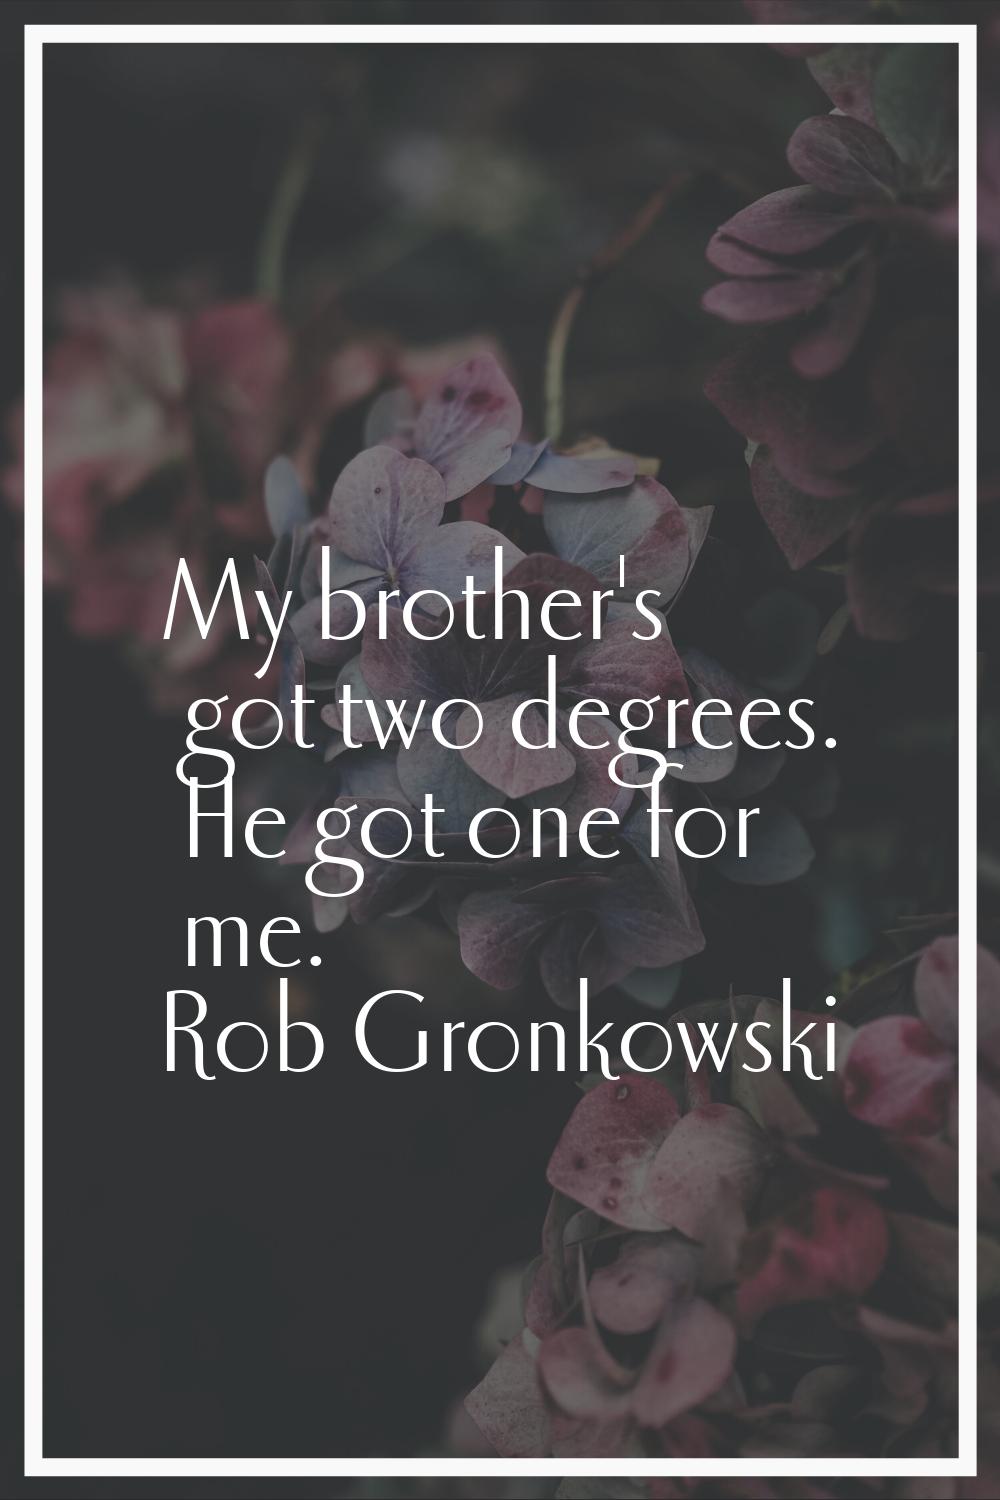 My brother's got two degrees. He got one for me.